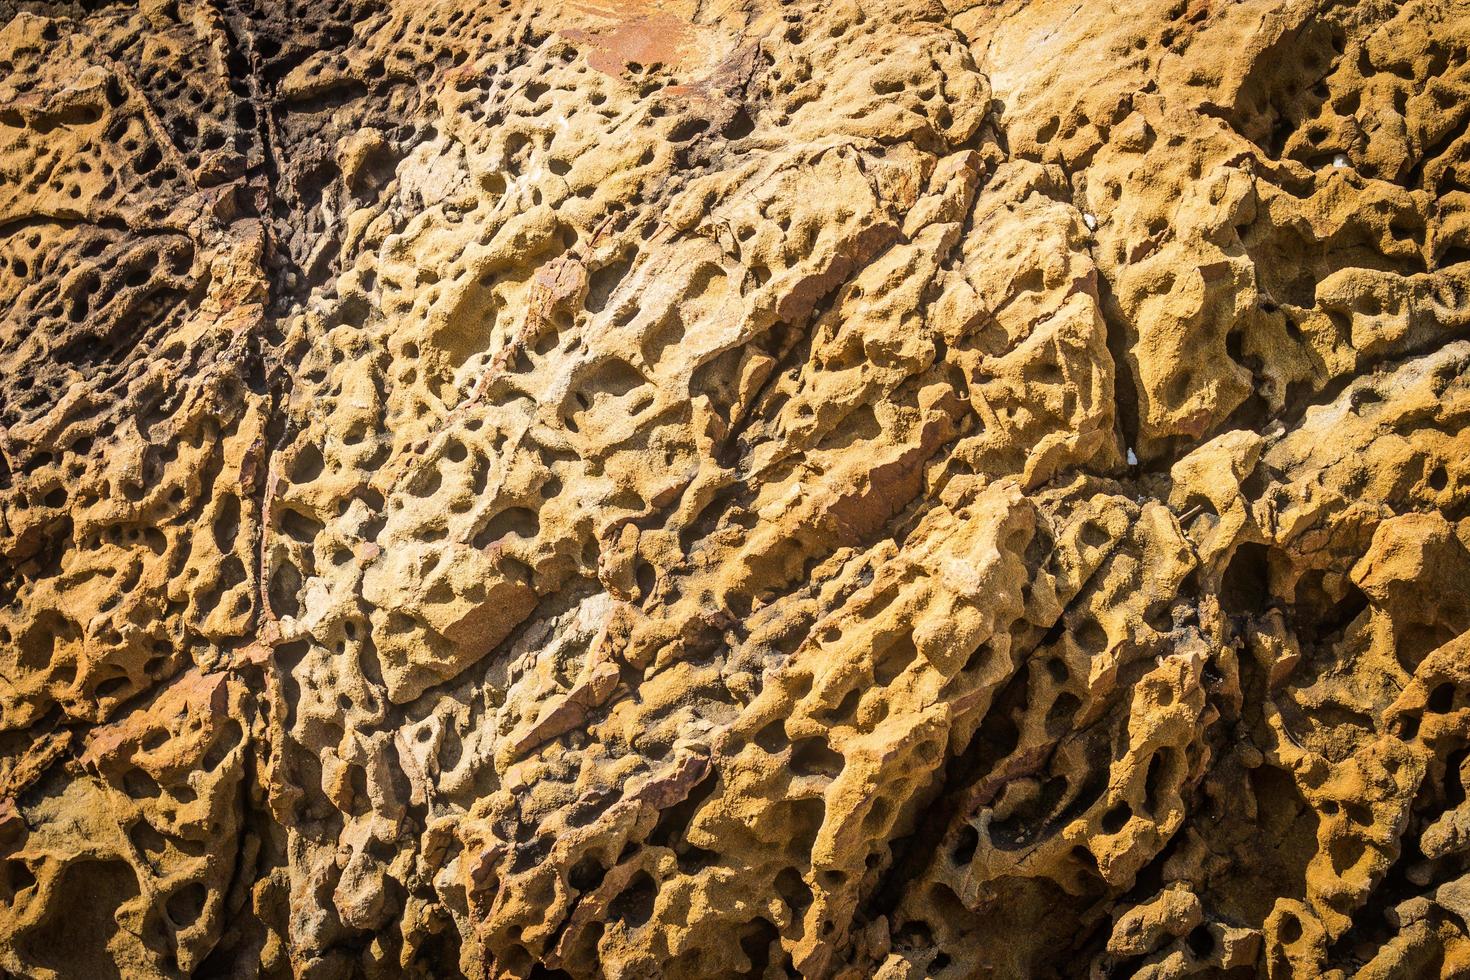 Rock surface for texture or background photo